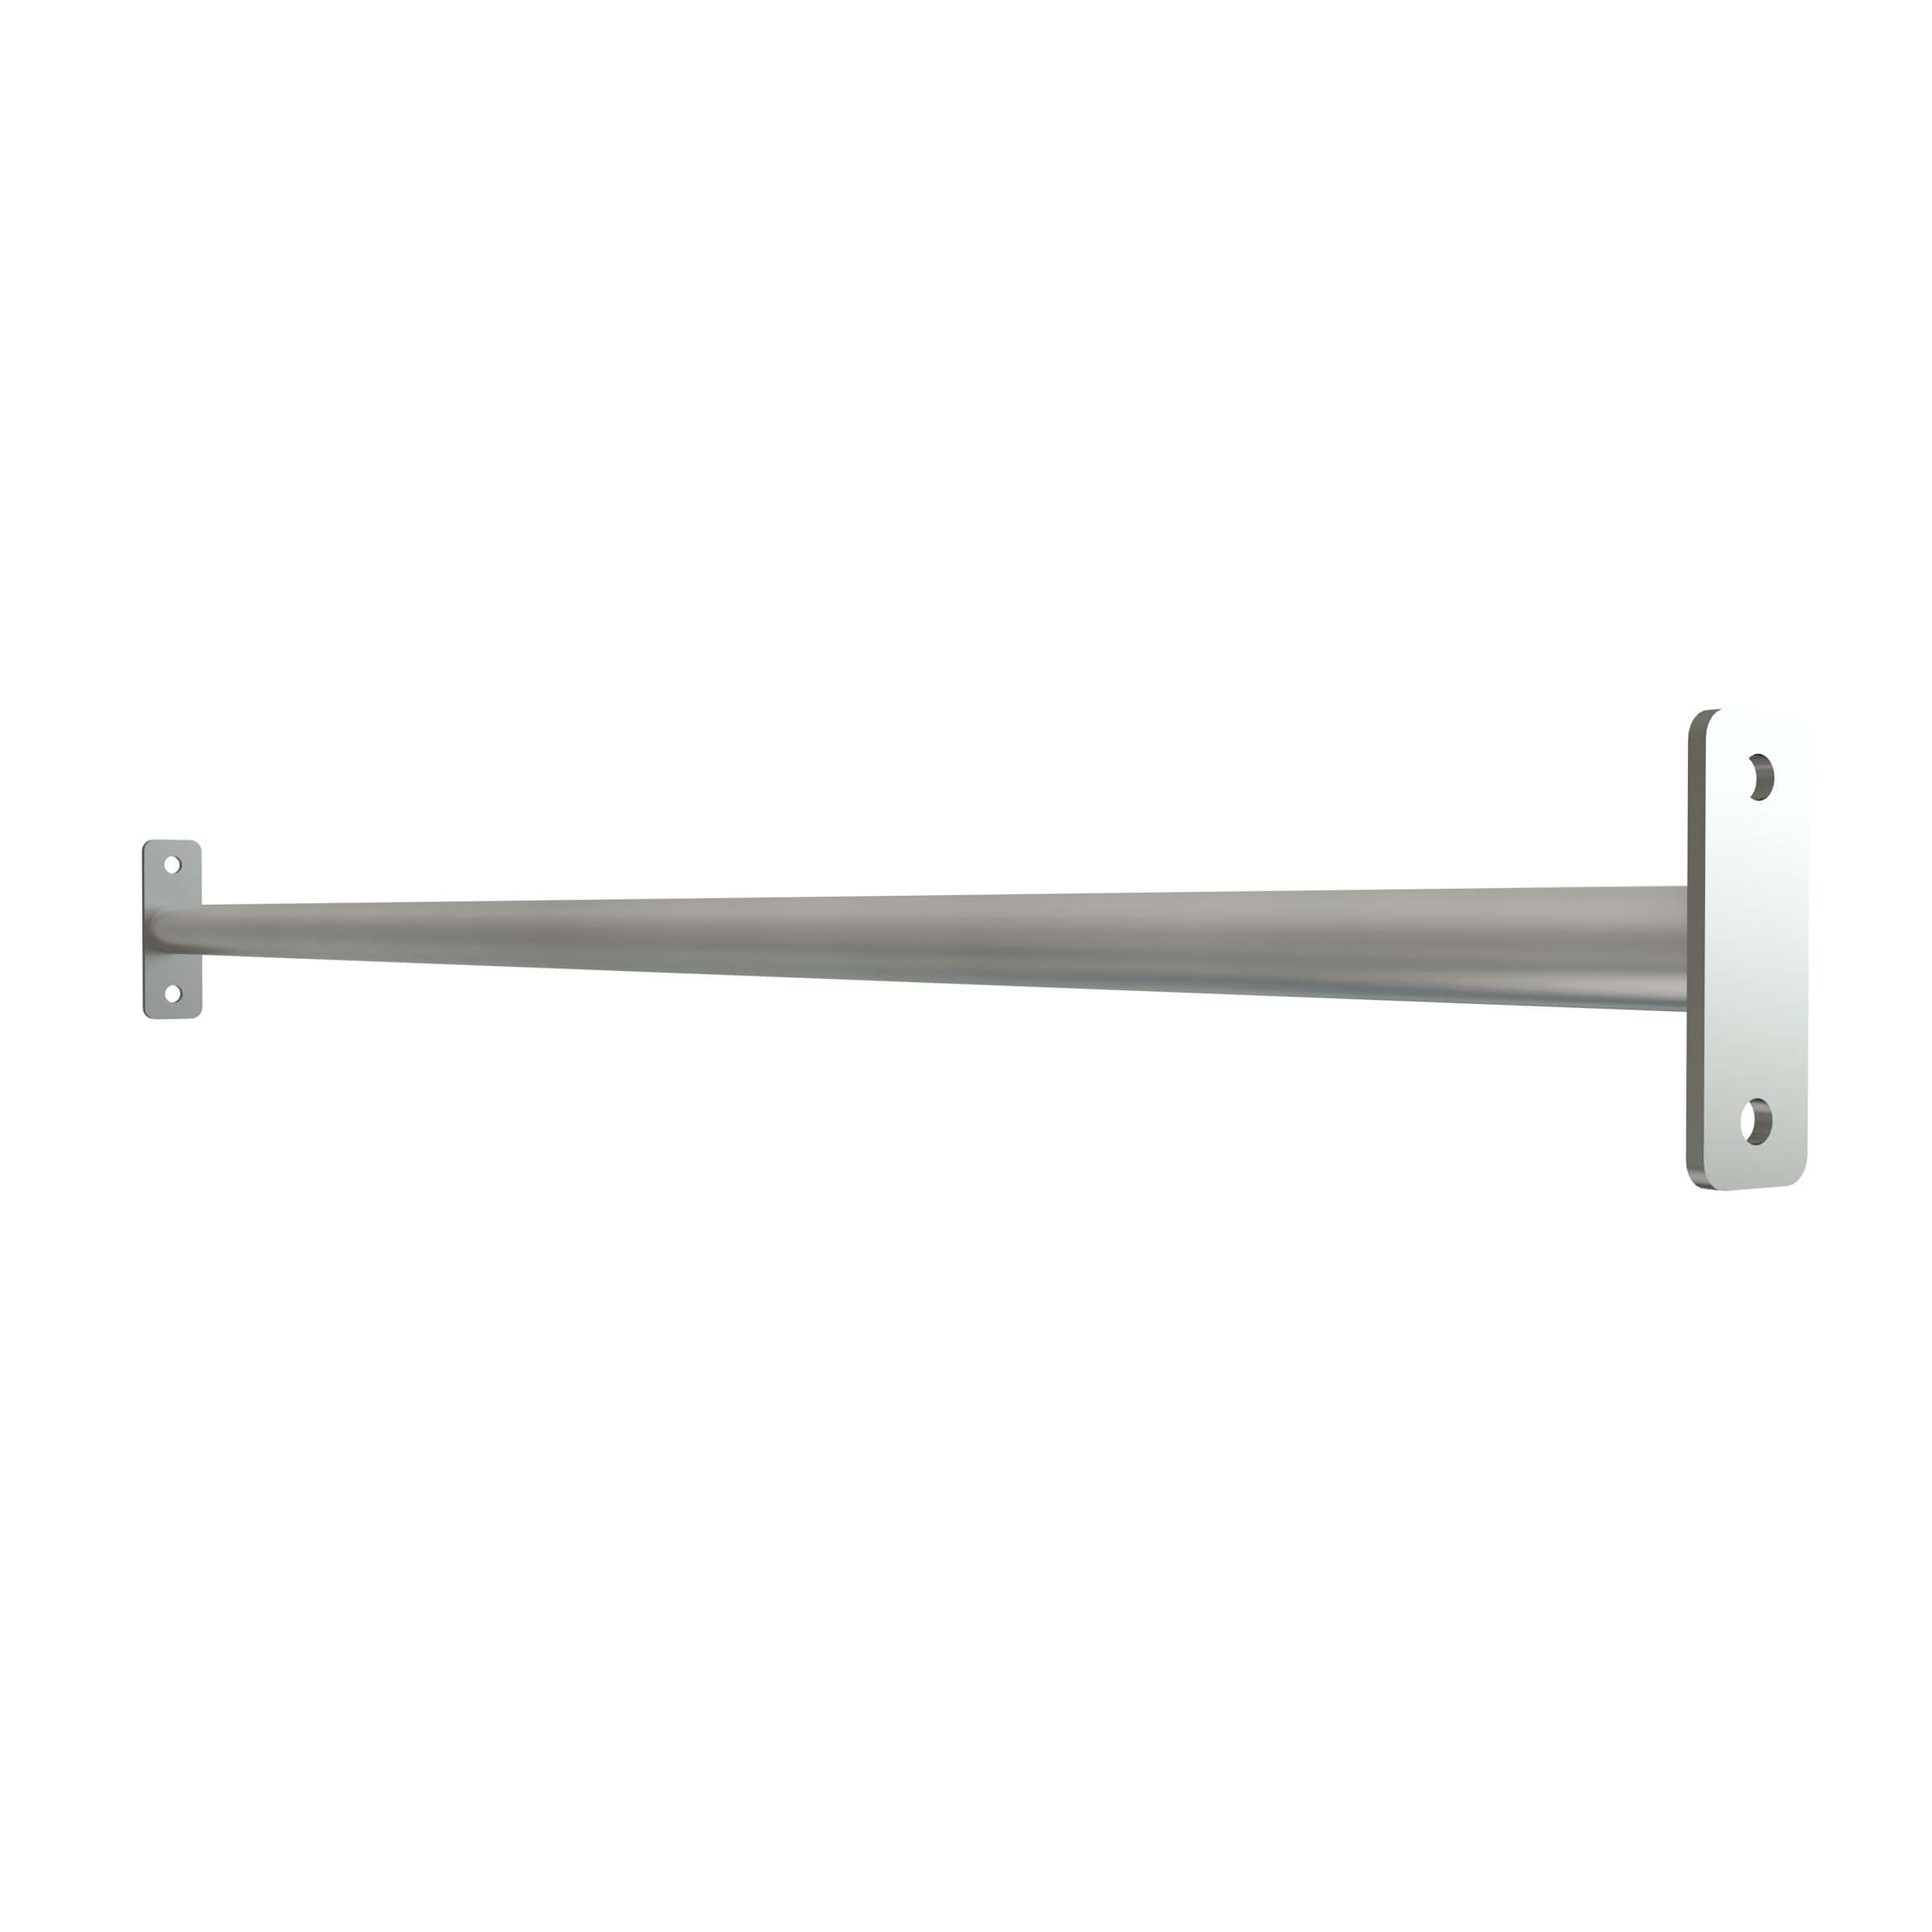 Pull-up bar V2A stainless steel with double fastening straps, glass bead blasted, length 140 cm